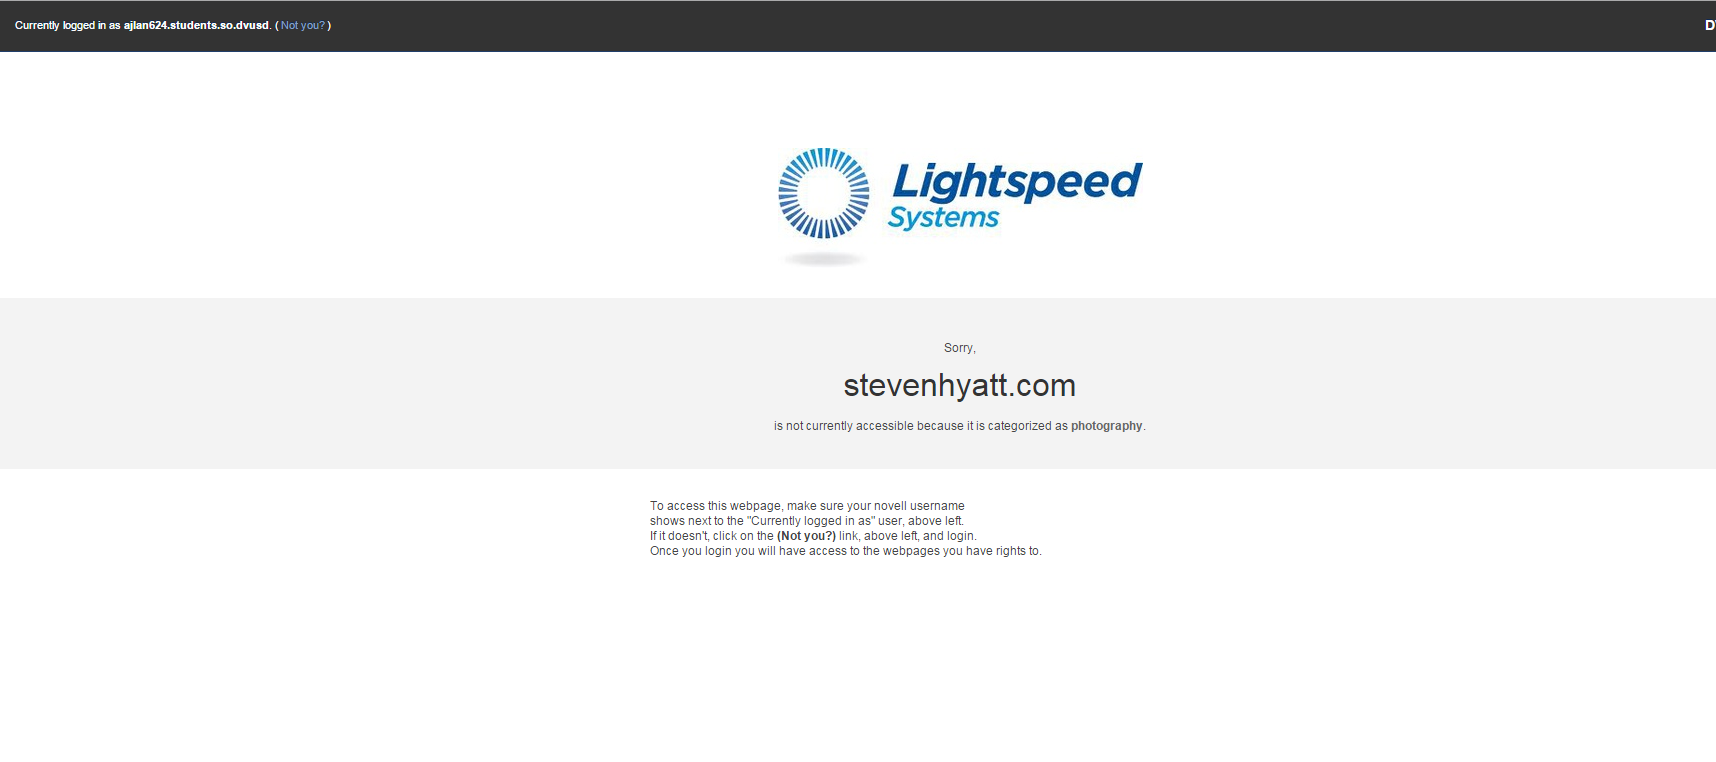 lightspeed systems support